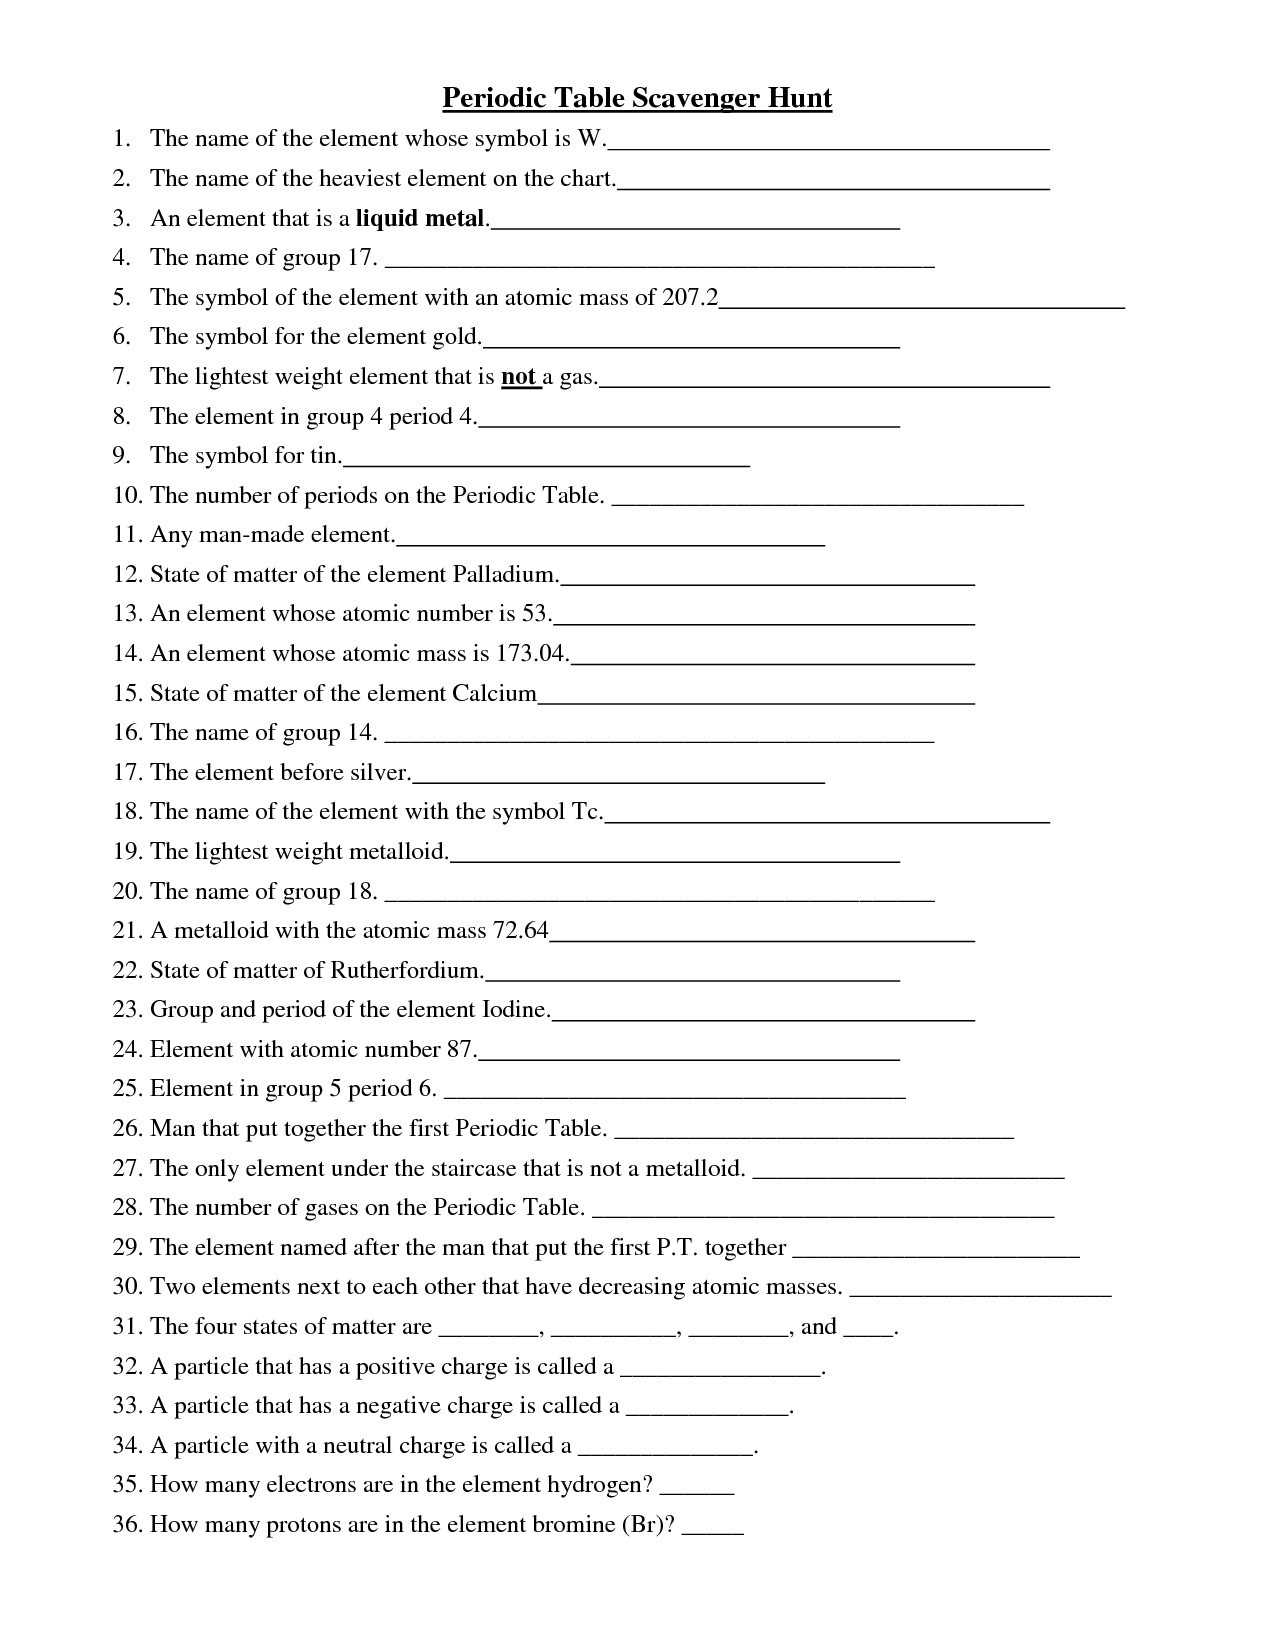 Counting atoms Worksheet Answers together with Chemistry Periodic Table Worksheet Answer Key Awesome Periodic Table